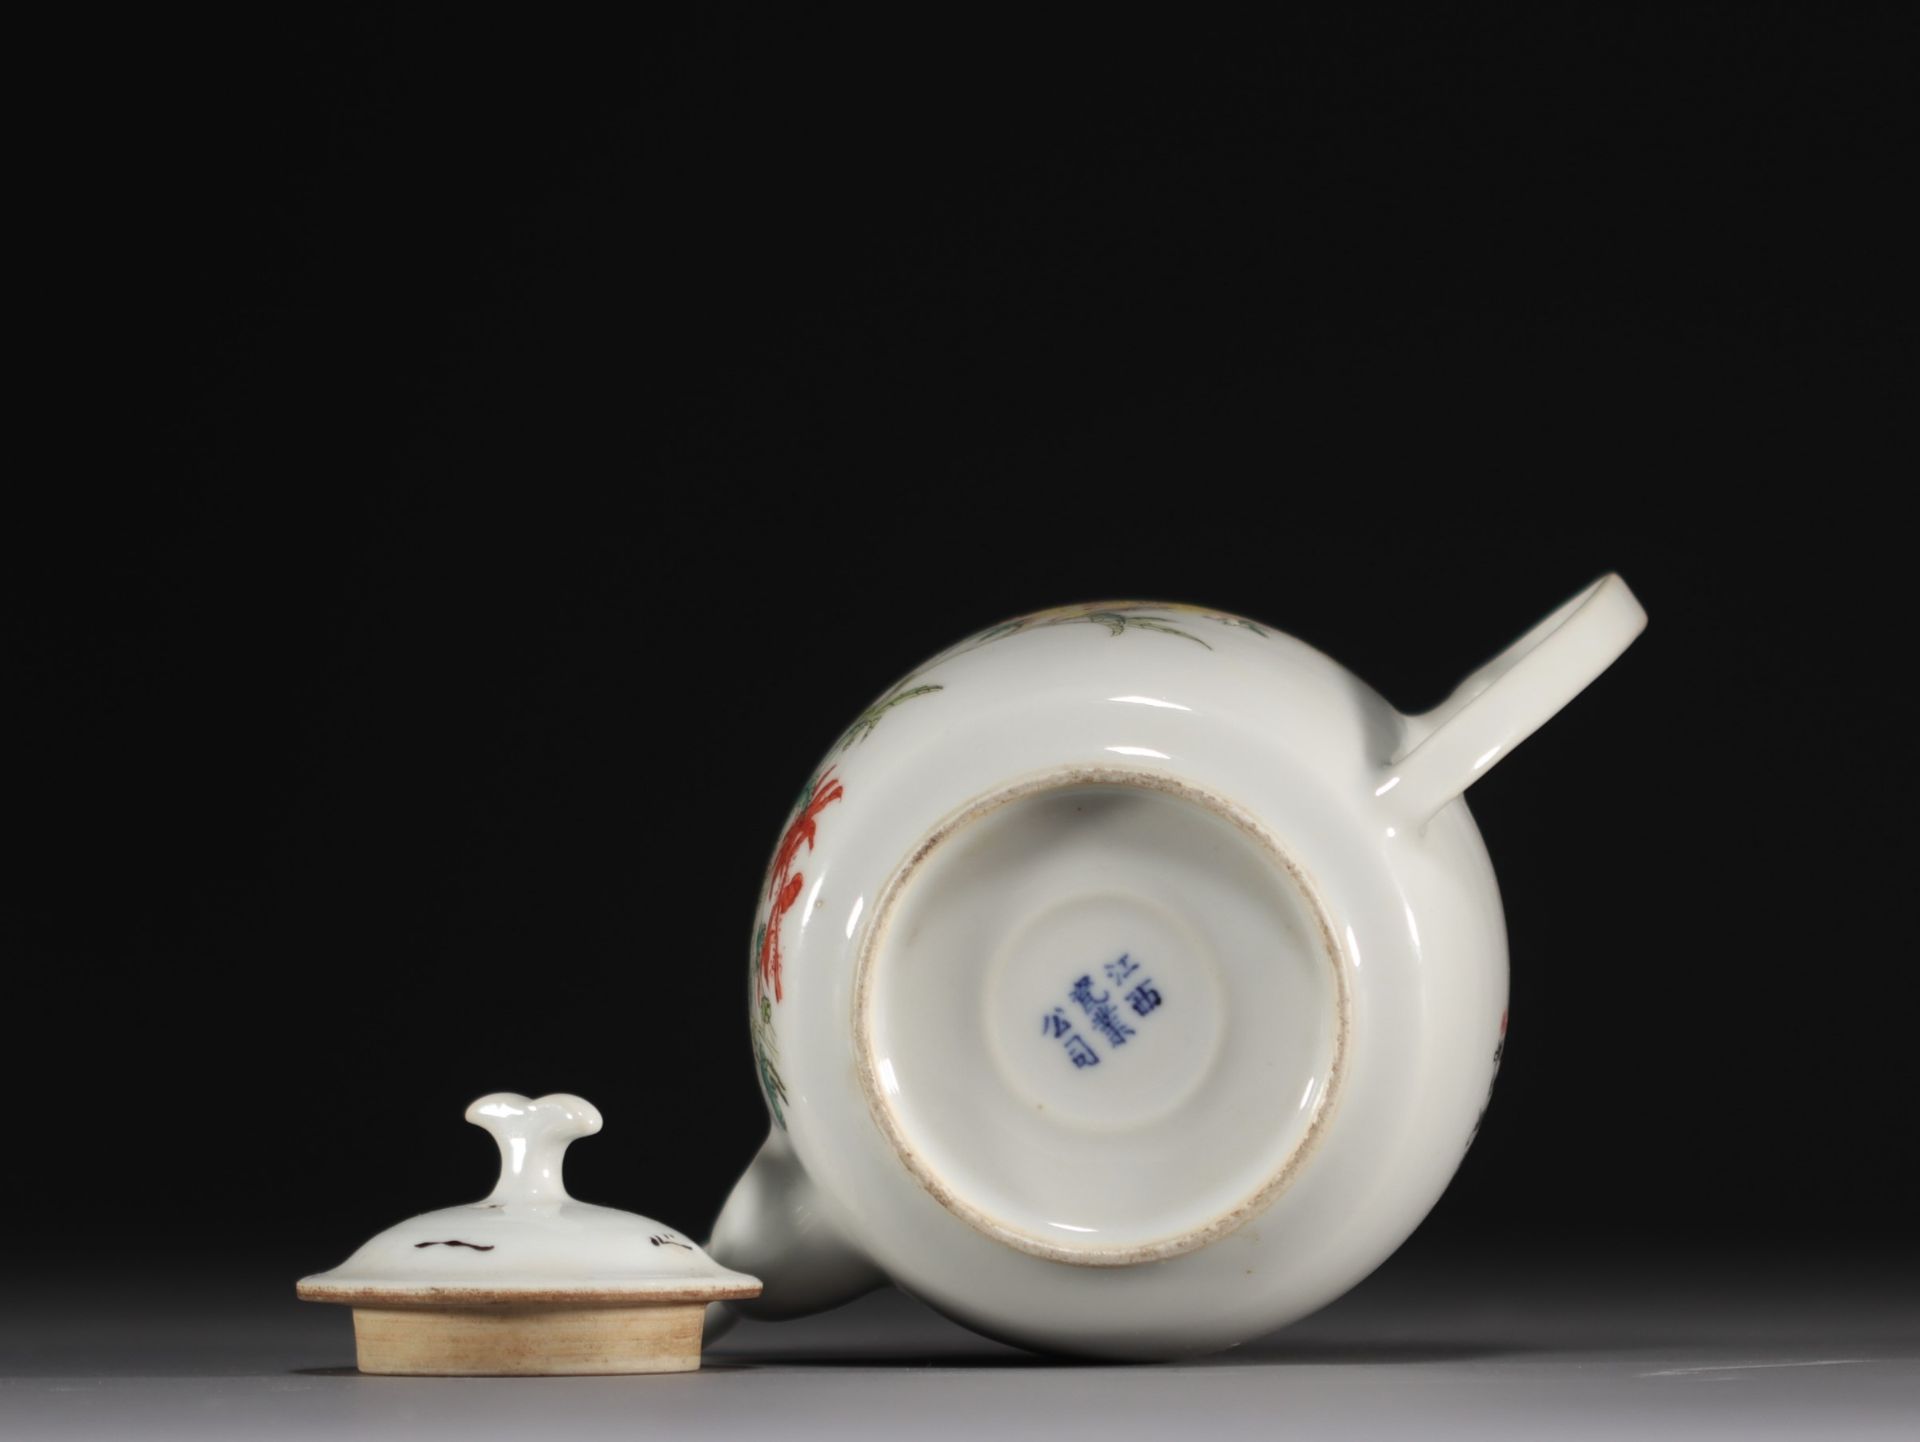 China - Jiangxi porcelain teapot with floral decoration, early 20th century. - Image 4 of 4